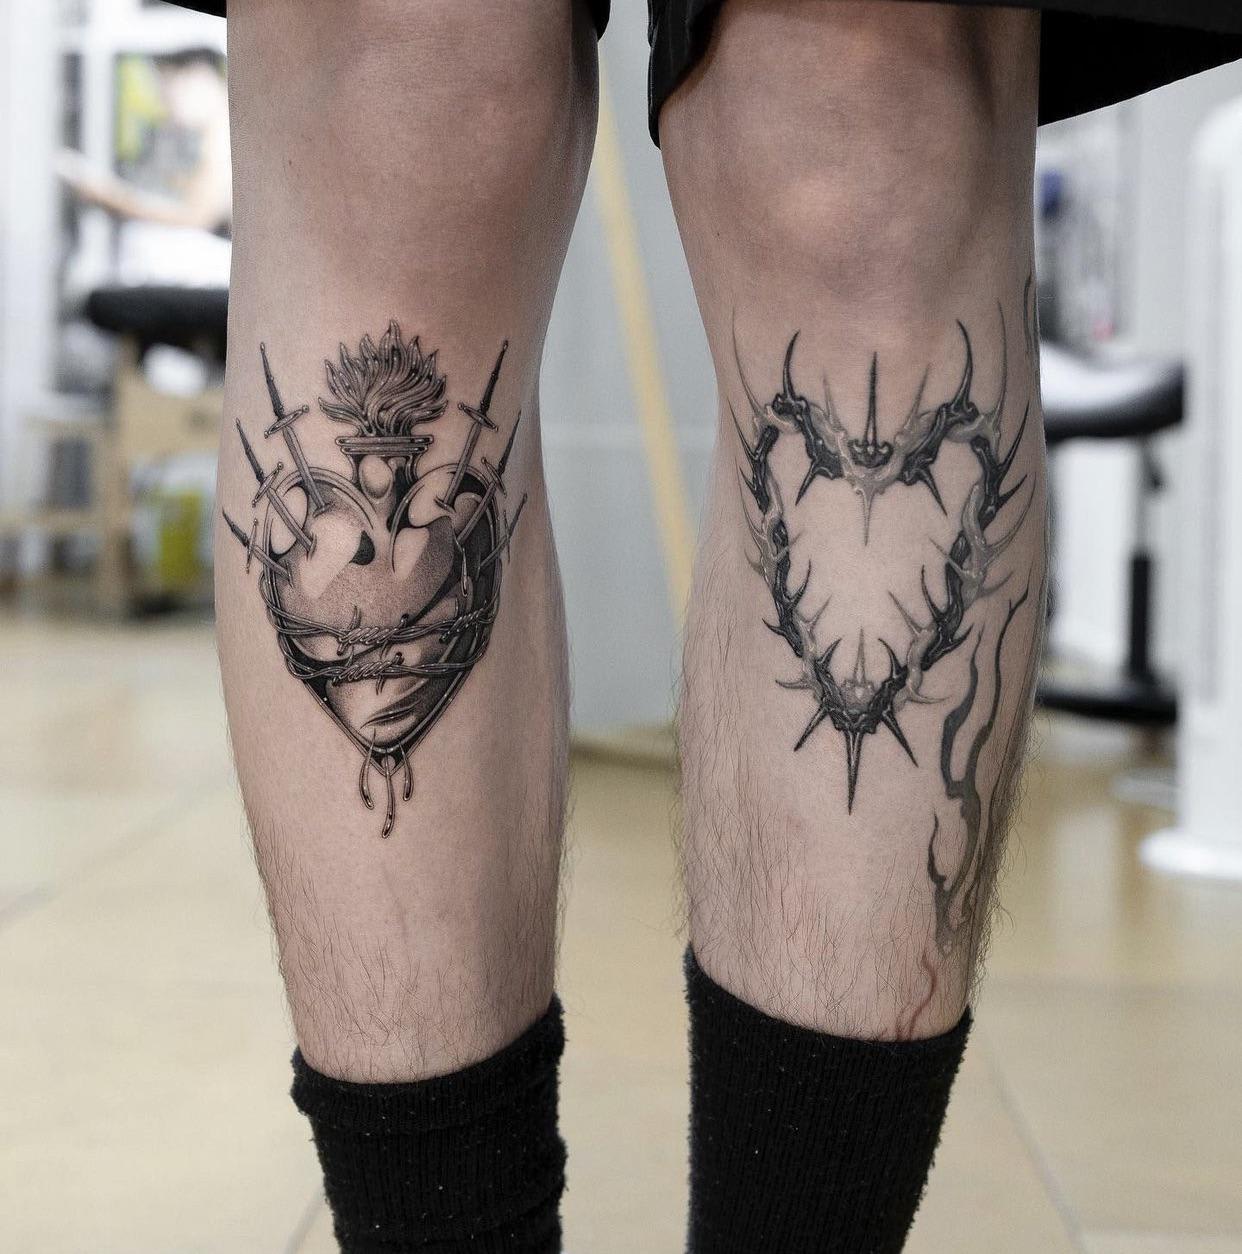 Sacred heart - Gemil grim and Thorn heart - danykim. Tattooers in Busan , South Korea at Bloodcandytattoo